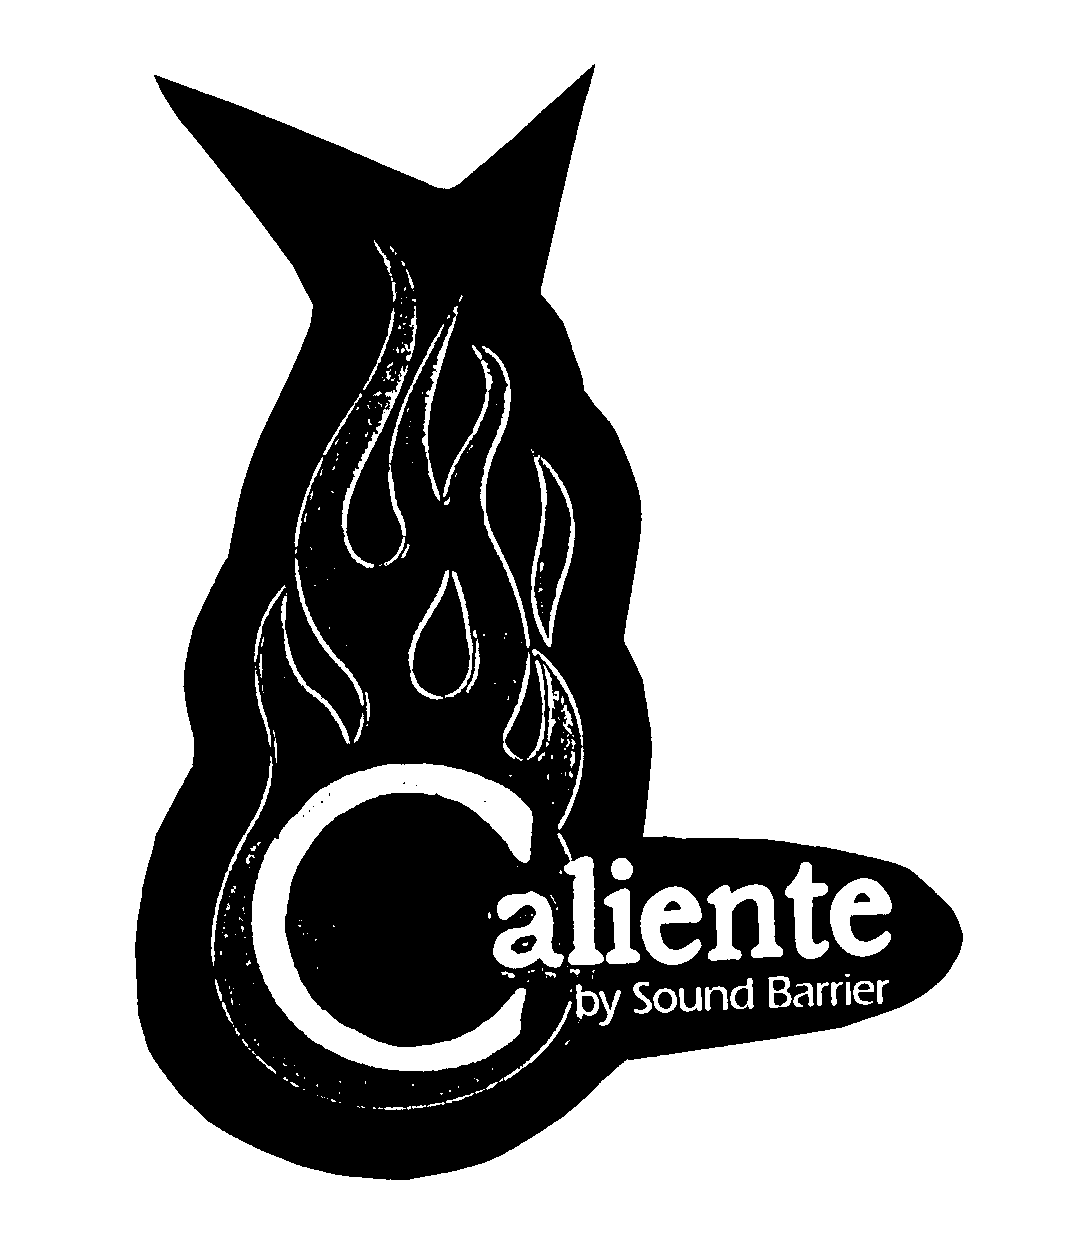  CALIENTE BY SOUND BARRIER